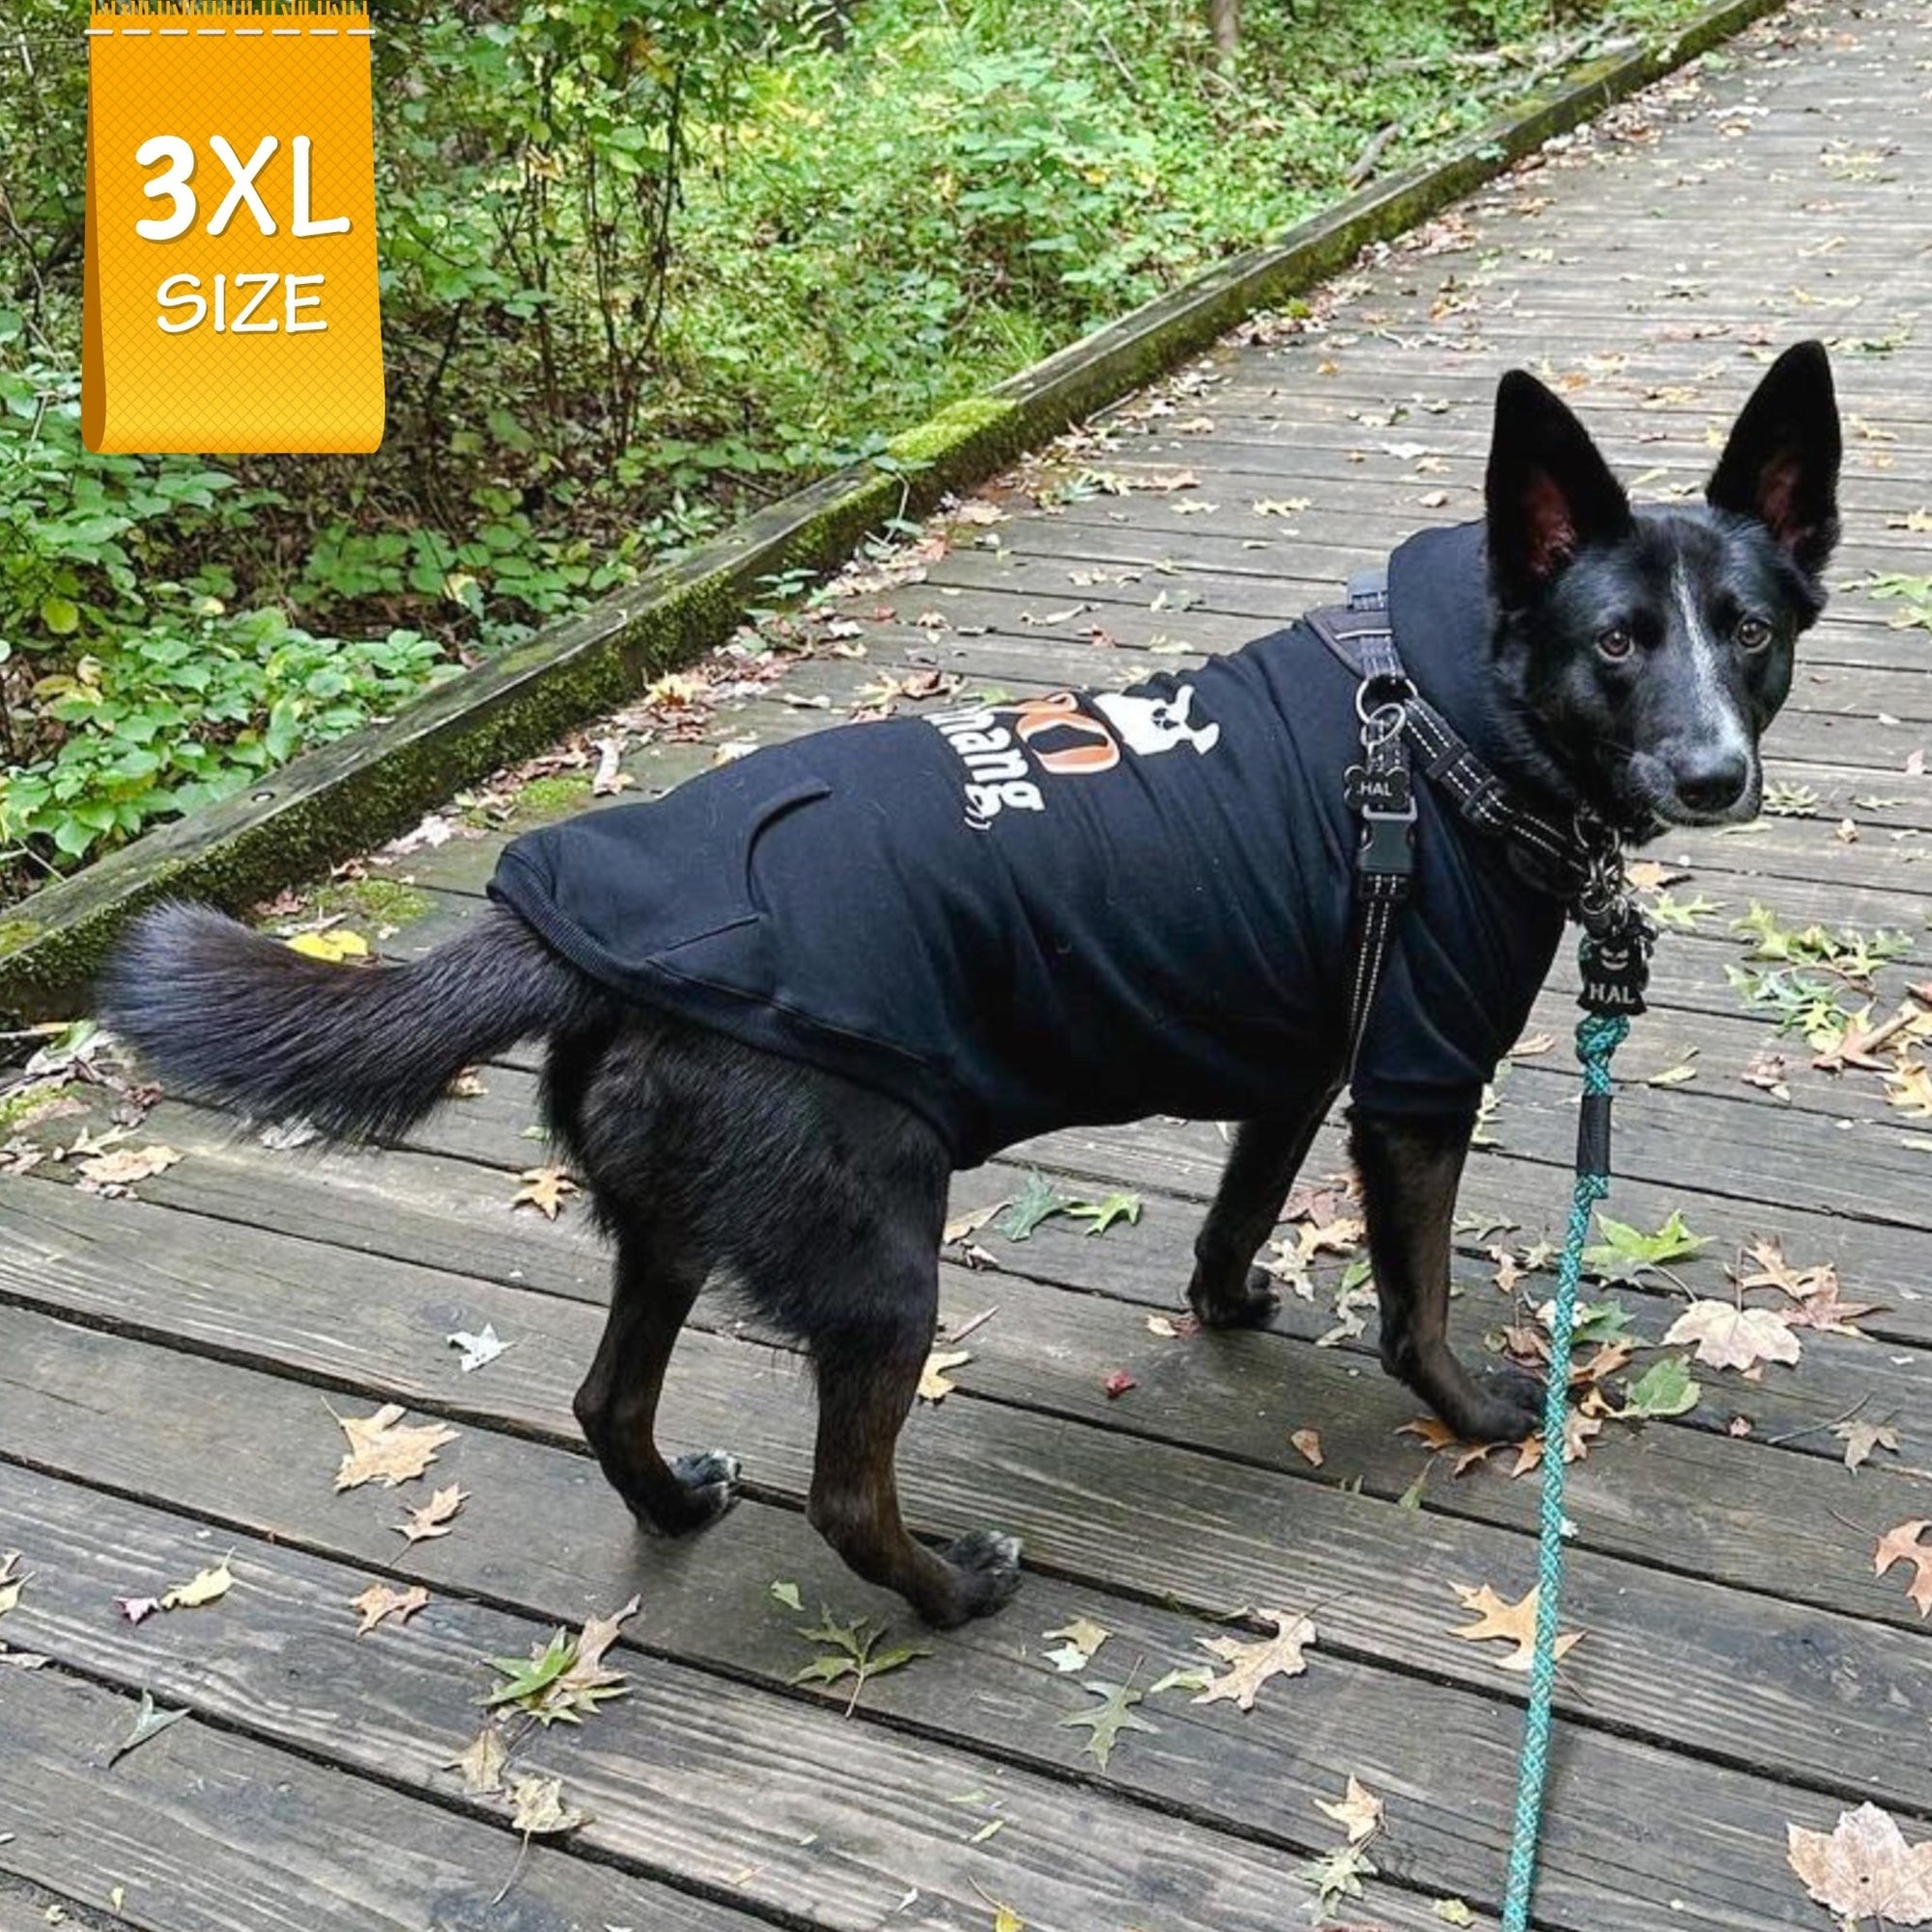 Dog Hoodie - Hoodie For Dogs - Large Dog wearing &quot;Shake Your Boo Thang&quot; dog hoodie in black - walking outdoors on a boardwalk - Wag Trendz